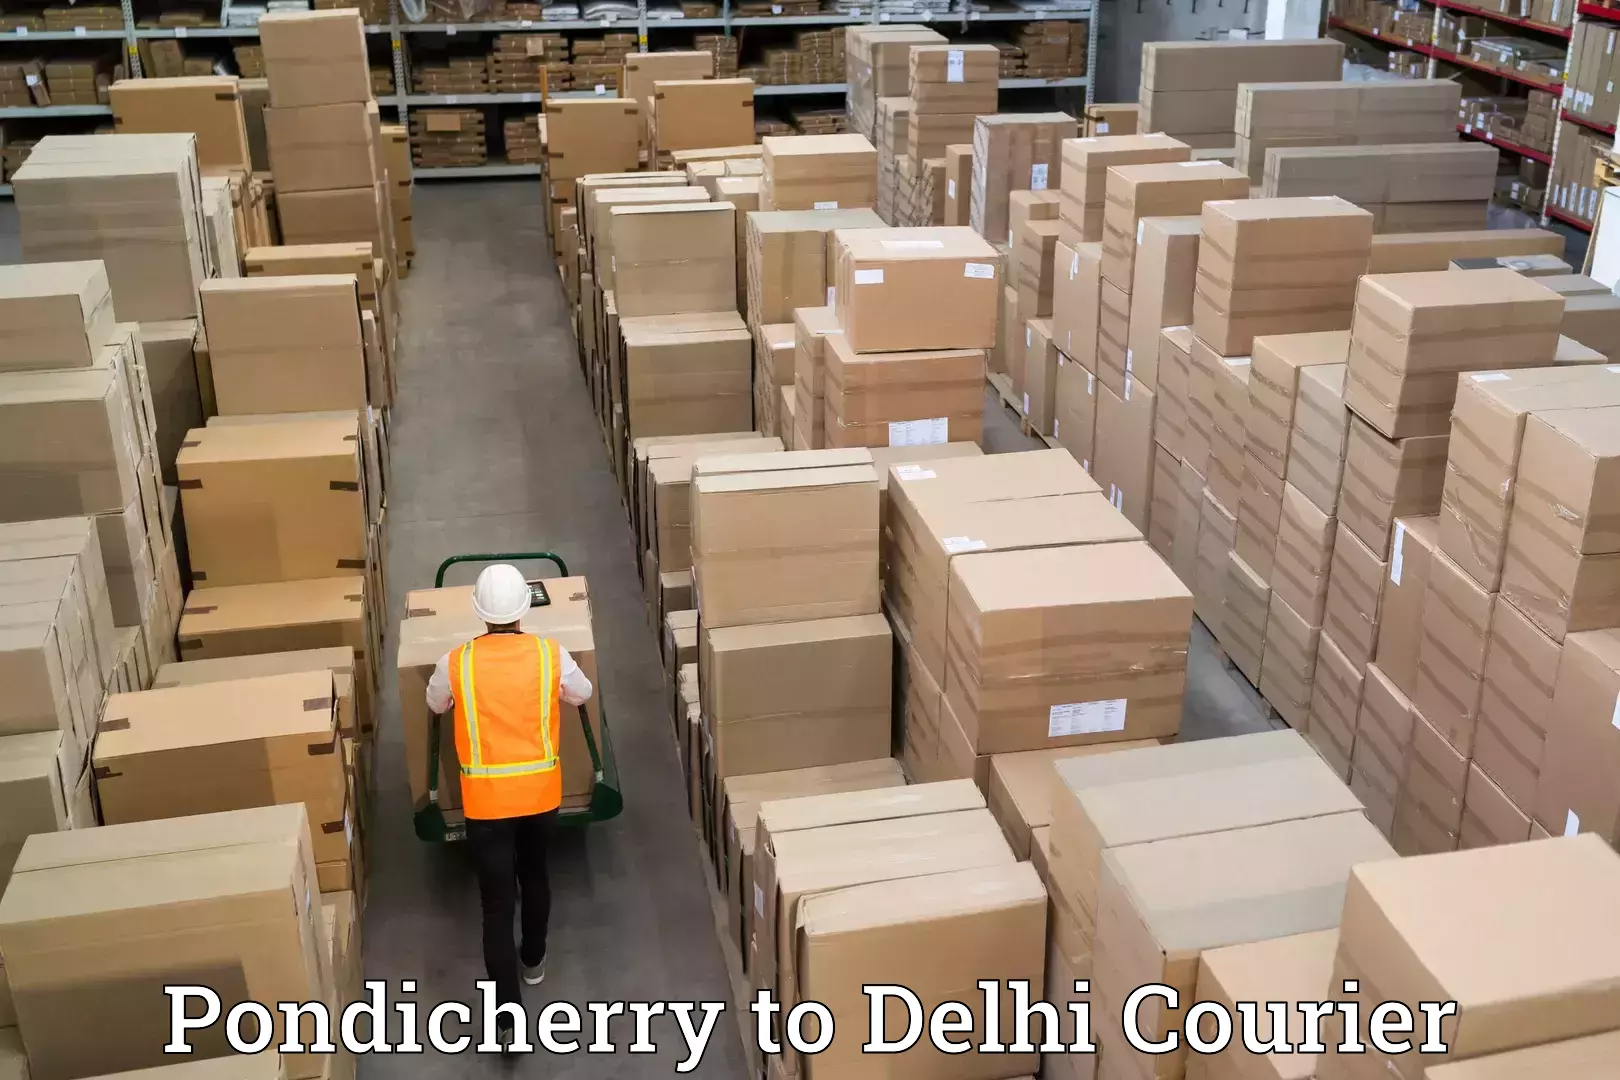 Trusted relocation experts Pondicherry to Delhi